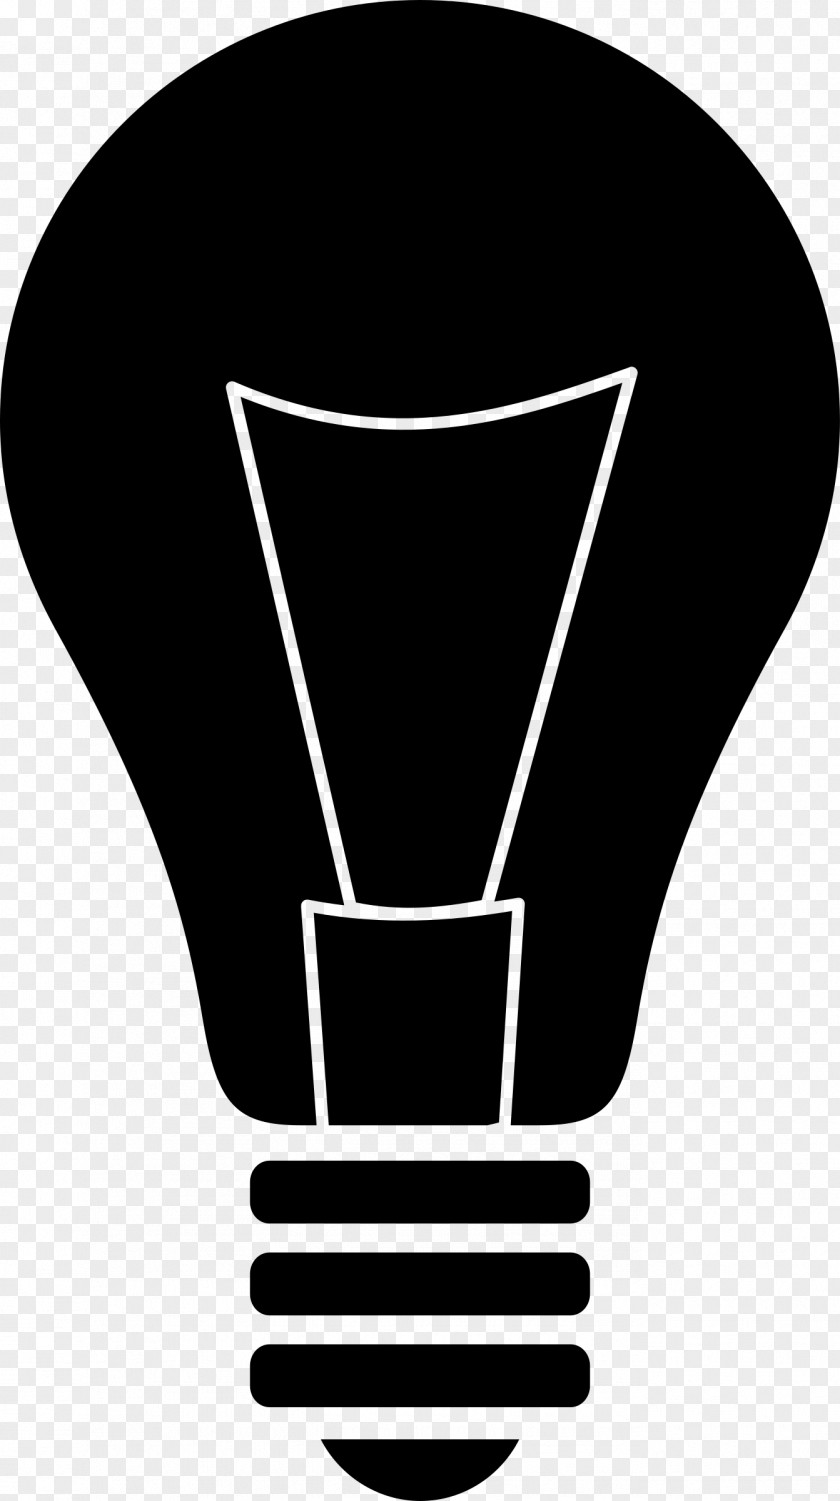 Point Of Light Incandescent Bulb Lamp Silhouette Clip Art PNG